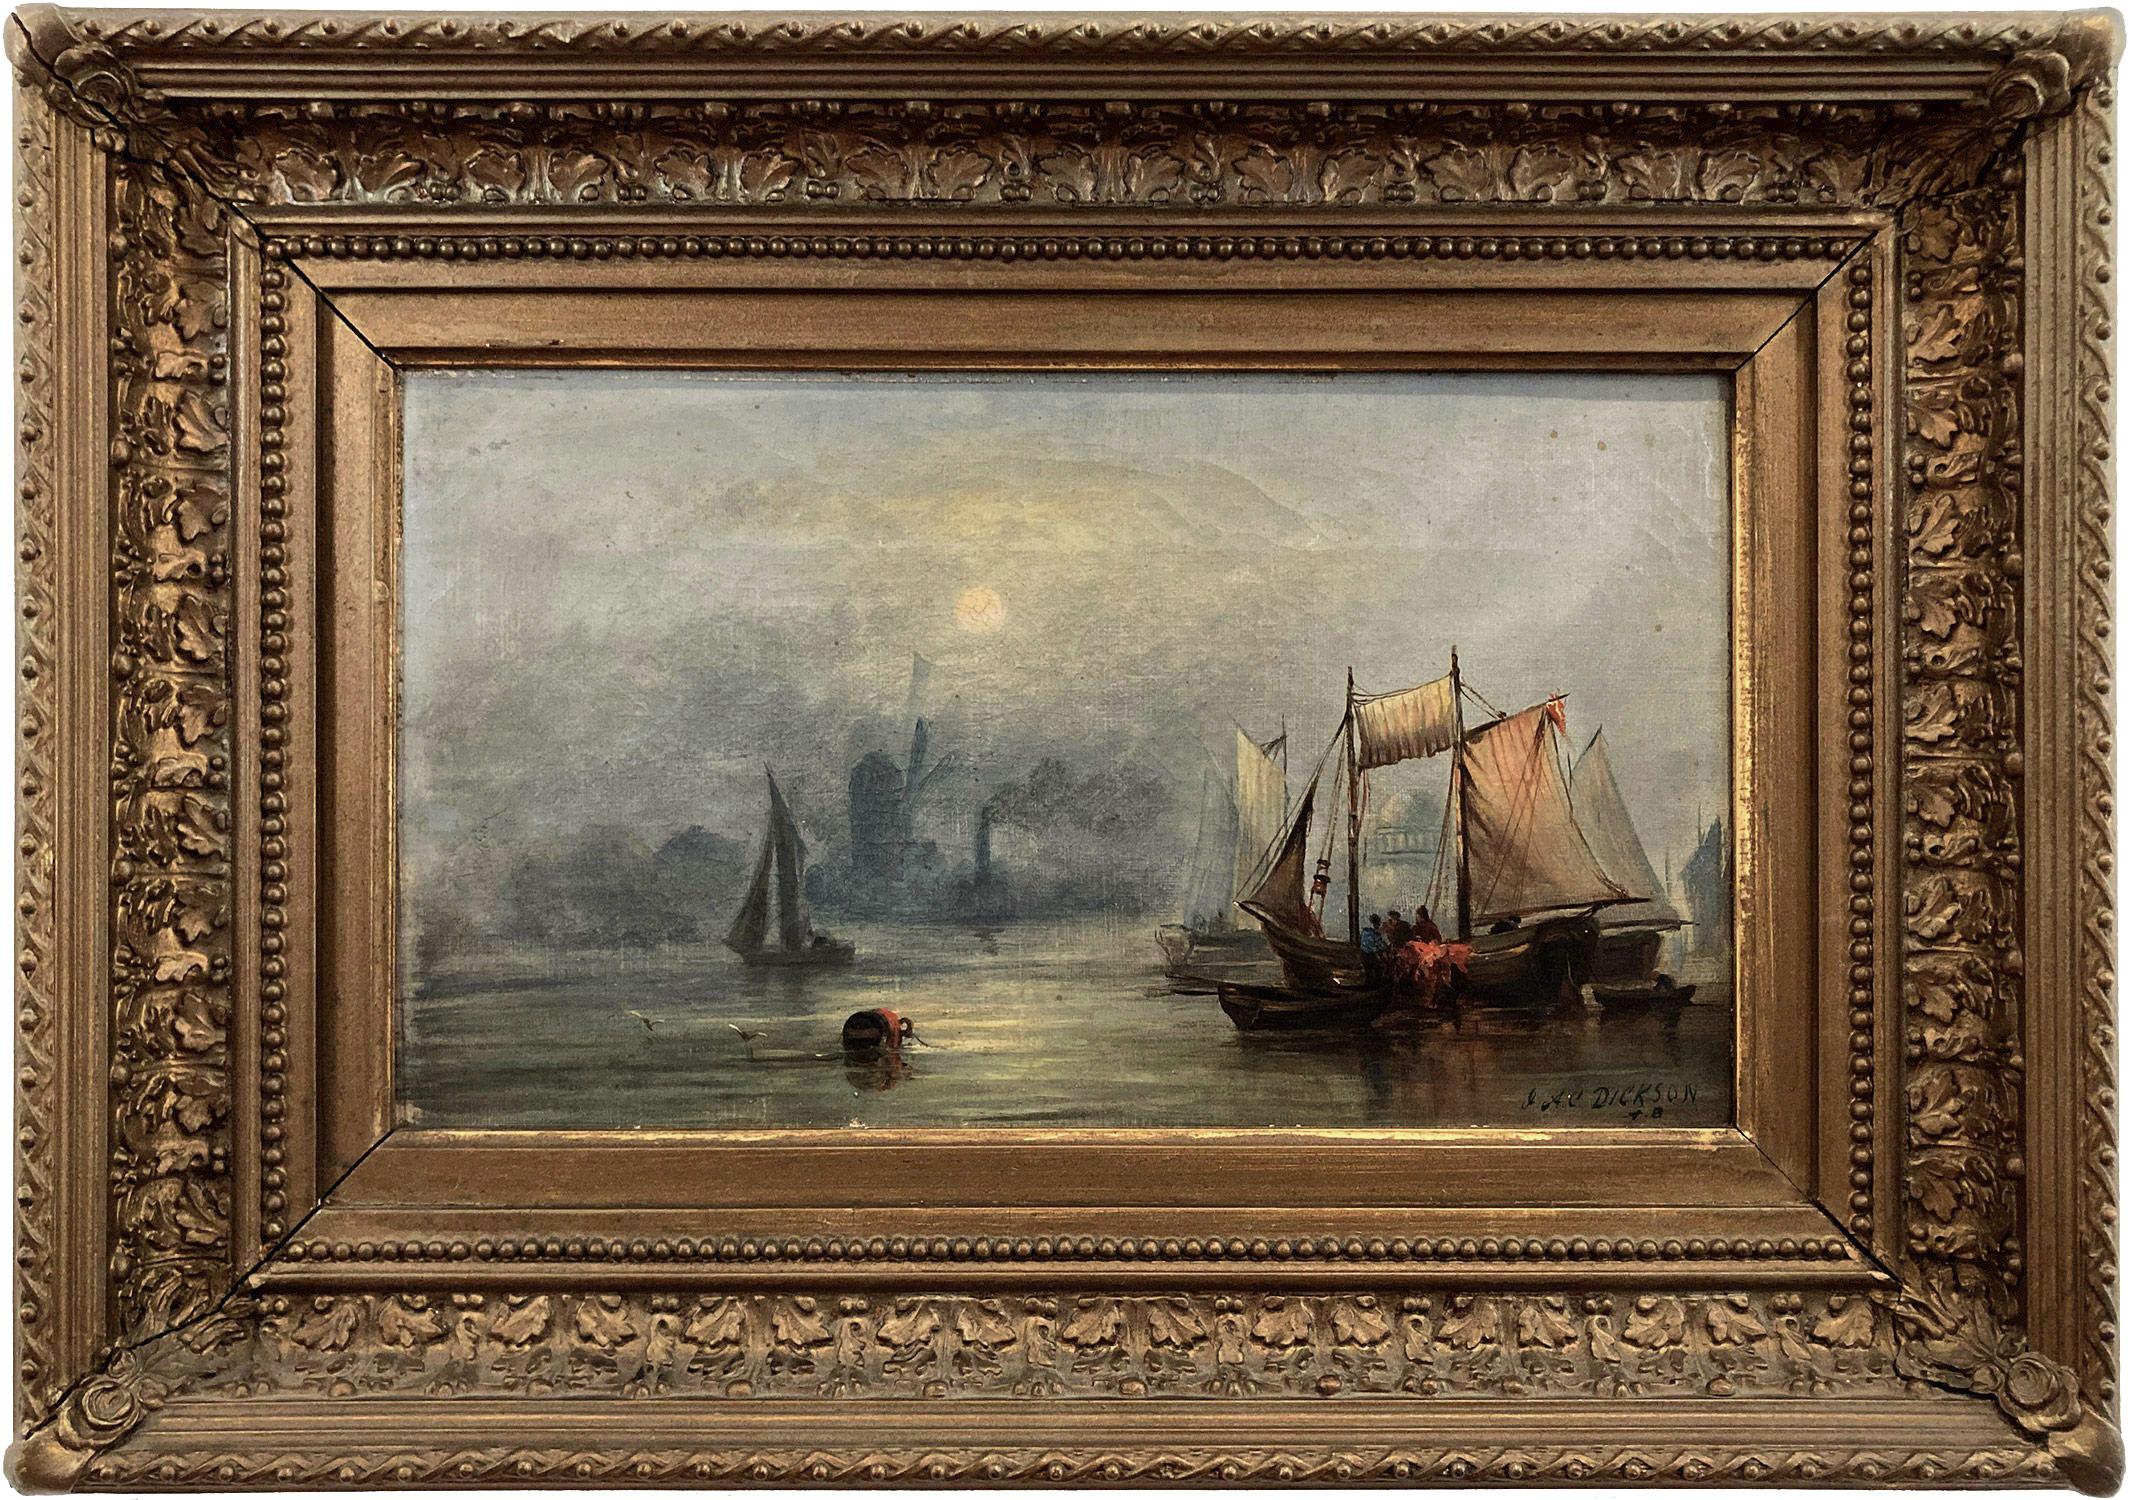 Unknown Figurative Painting - "Ships at Sea" In the style of J. M. W Turner 19th Century American Oil Painting